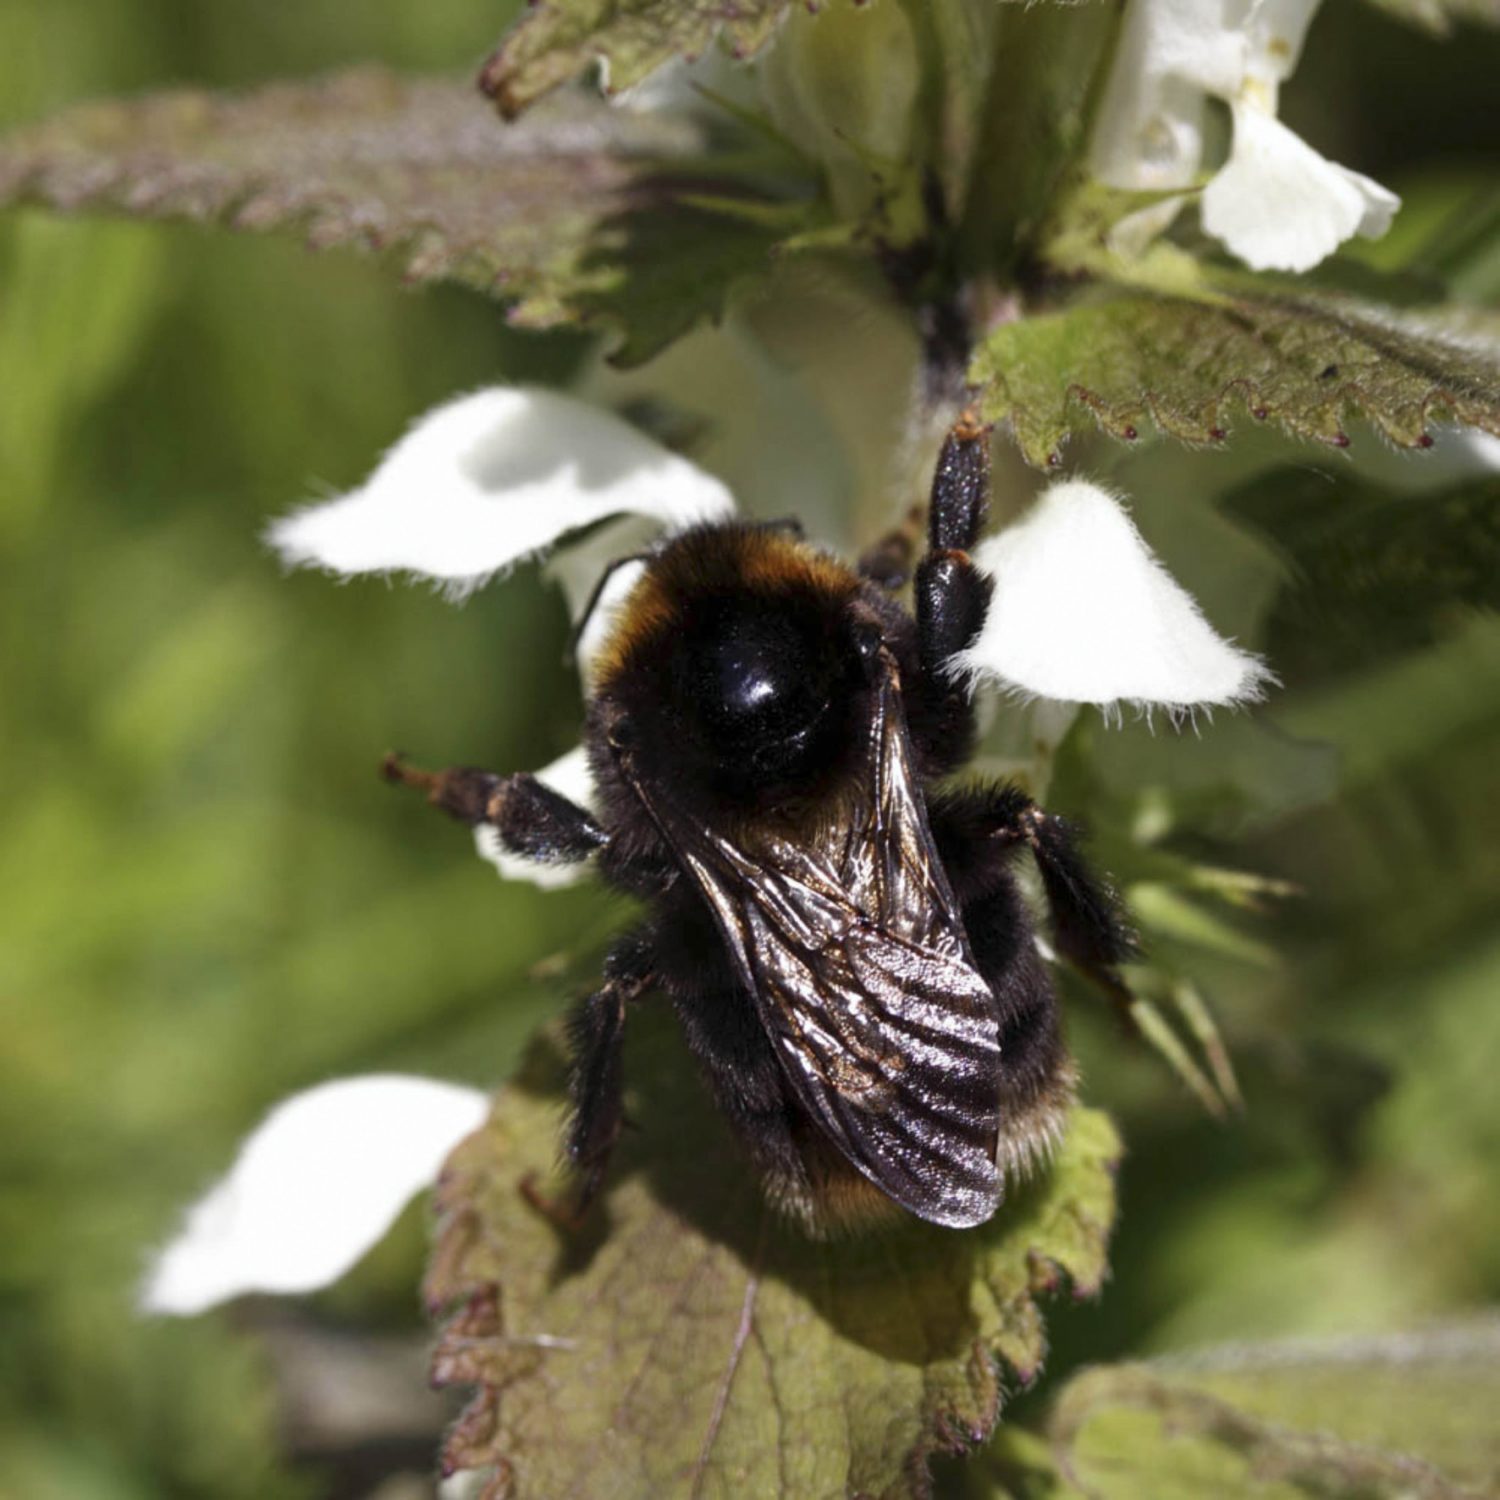 A project to reintroduce the short-haired bumblebee, Bombus subterraneus was set up in January 2009 with partners, the RSPB, Natural England, the Bumblebee Conservation Trust and Hymettus